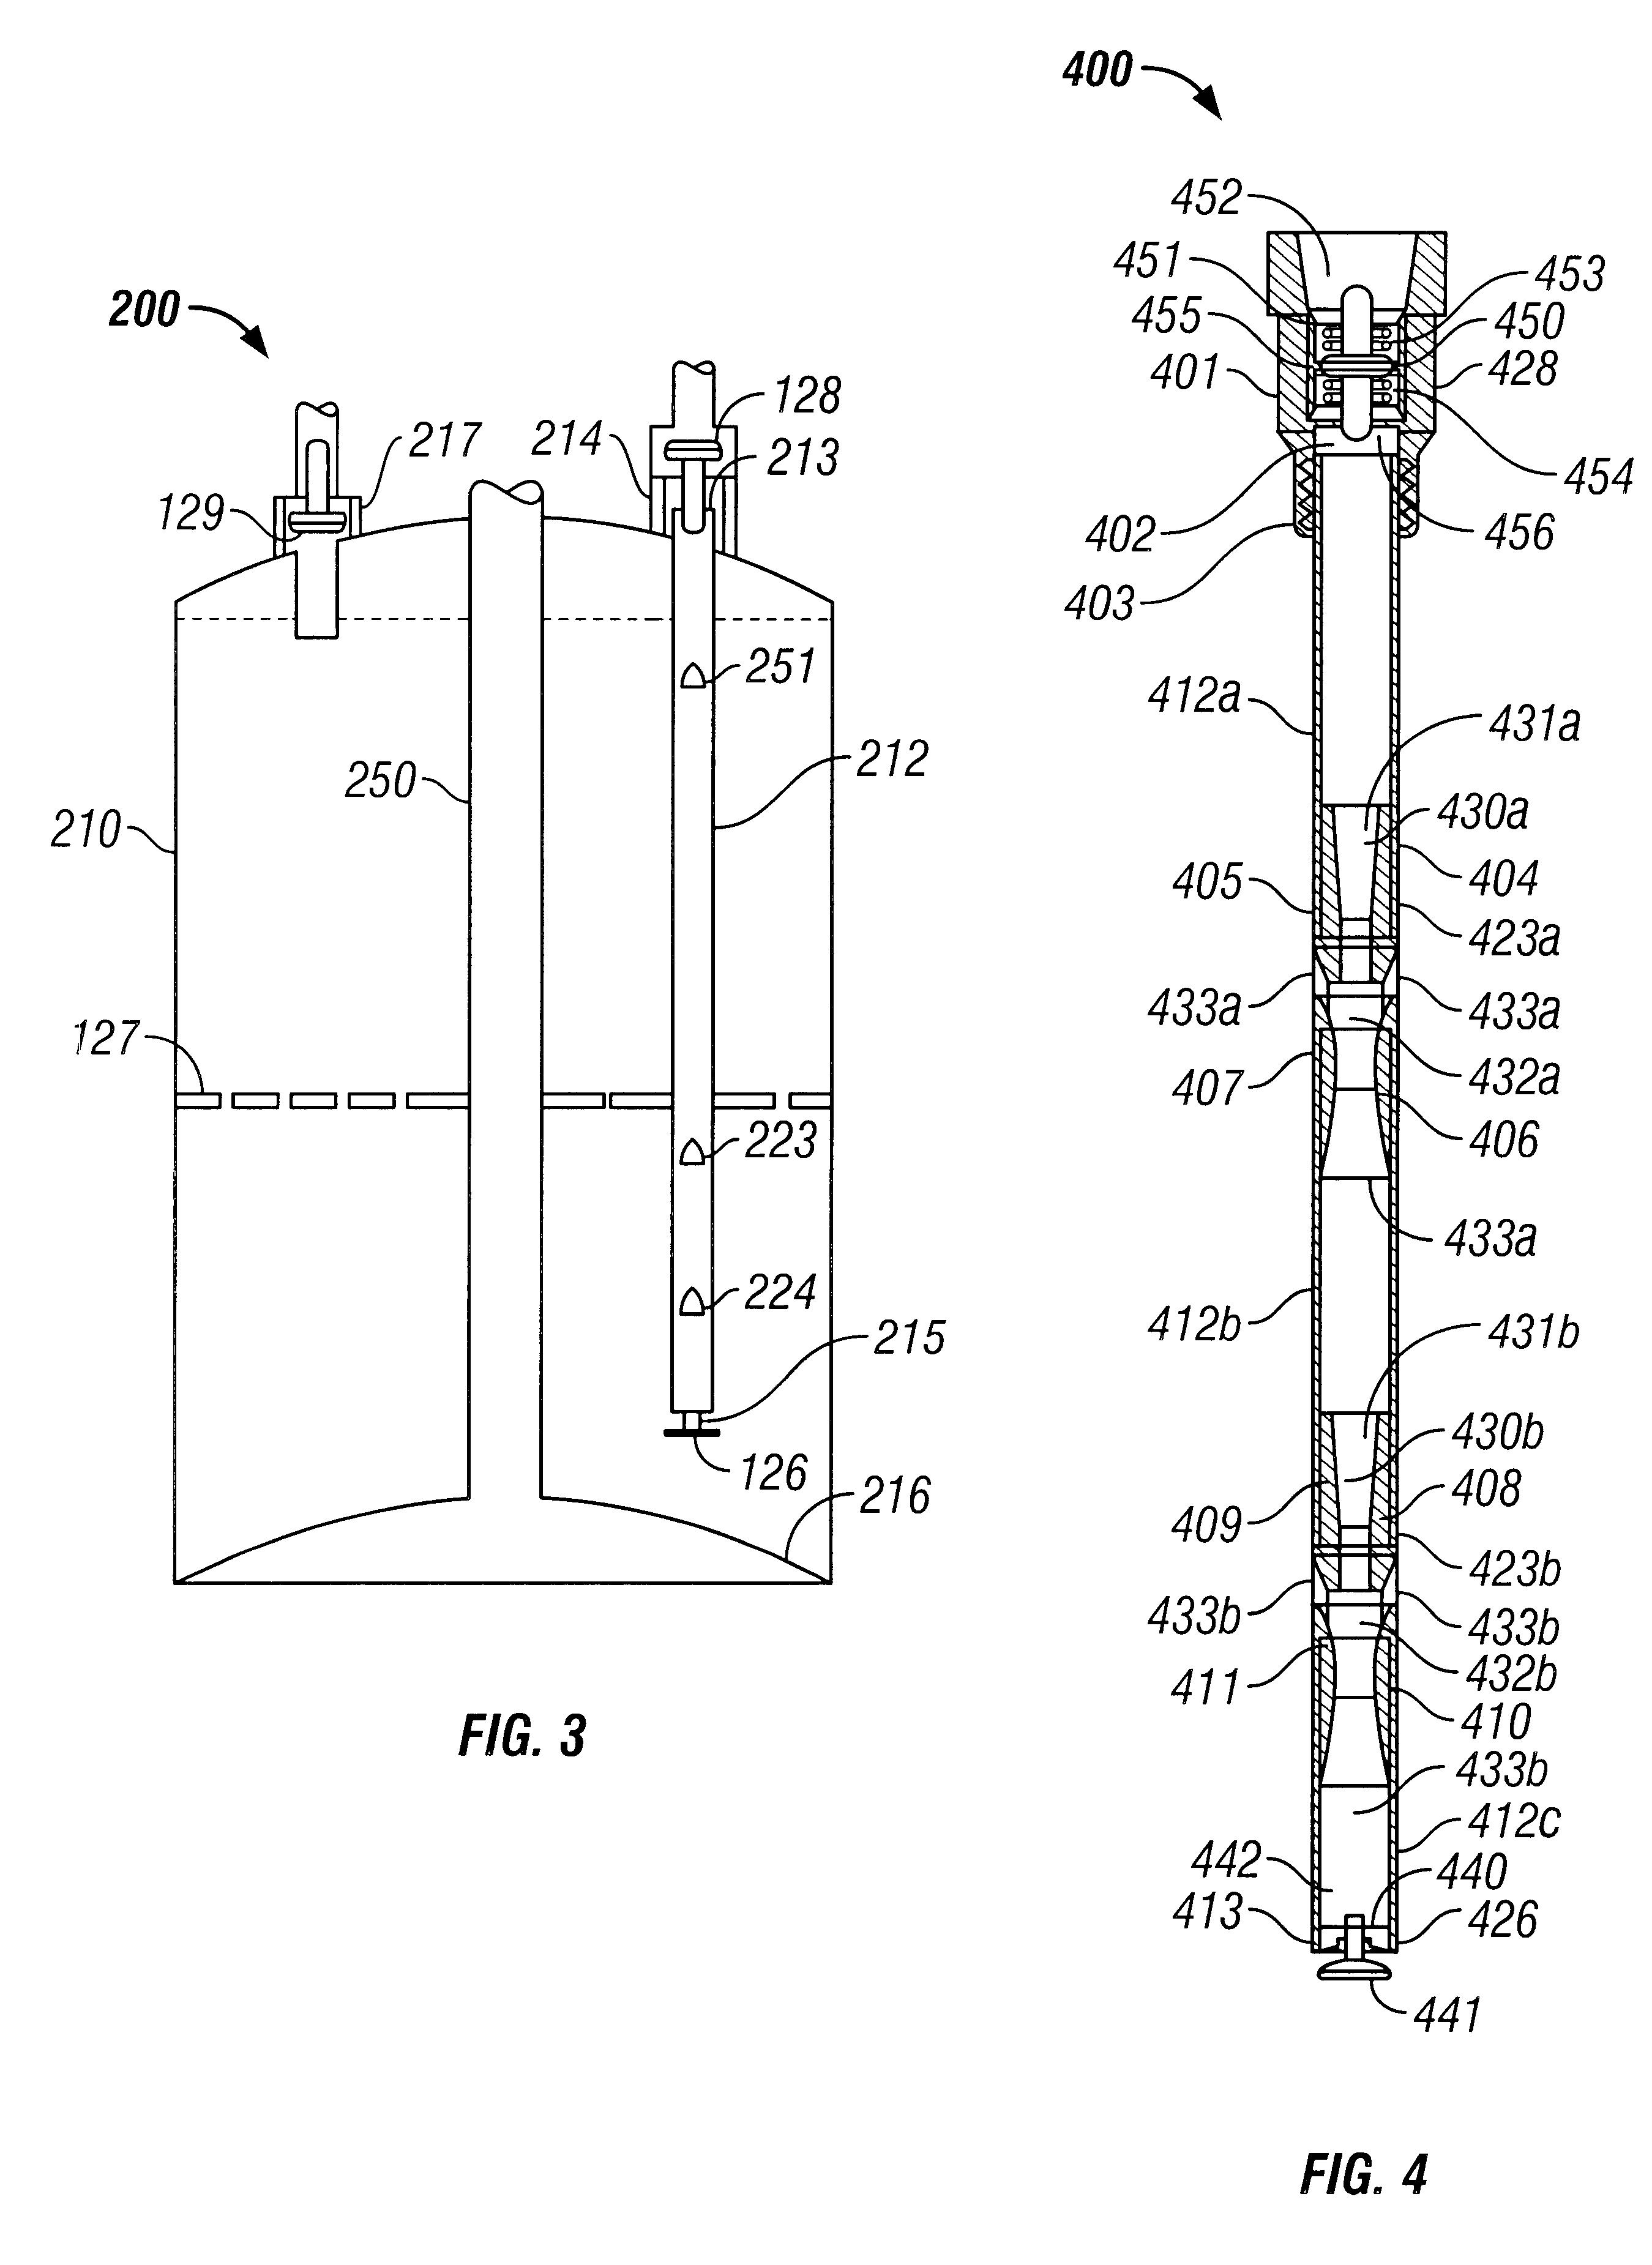 Water mixing system for water heaters